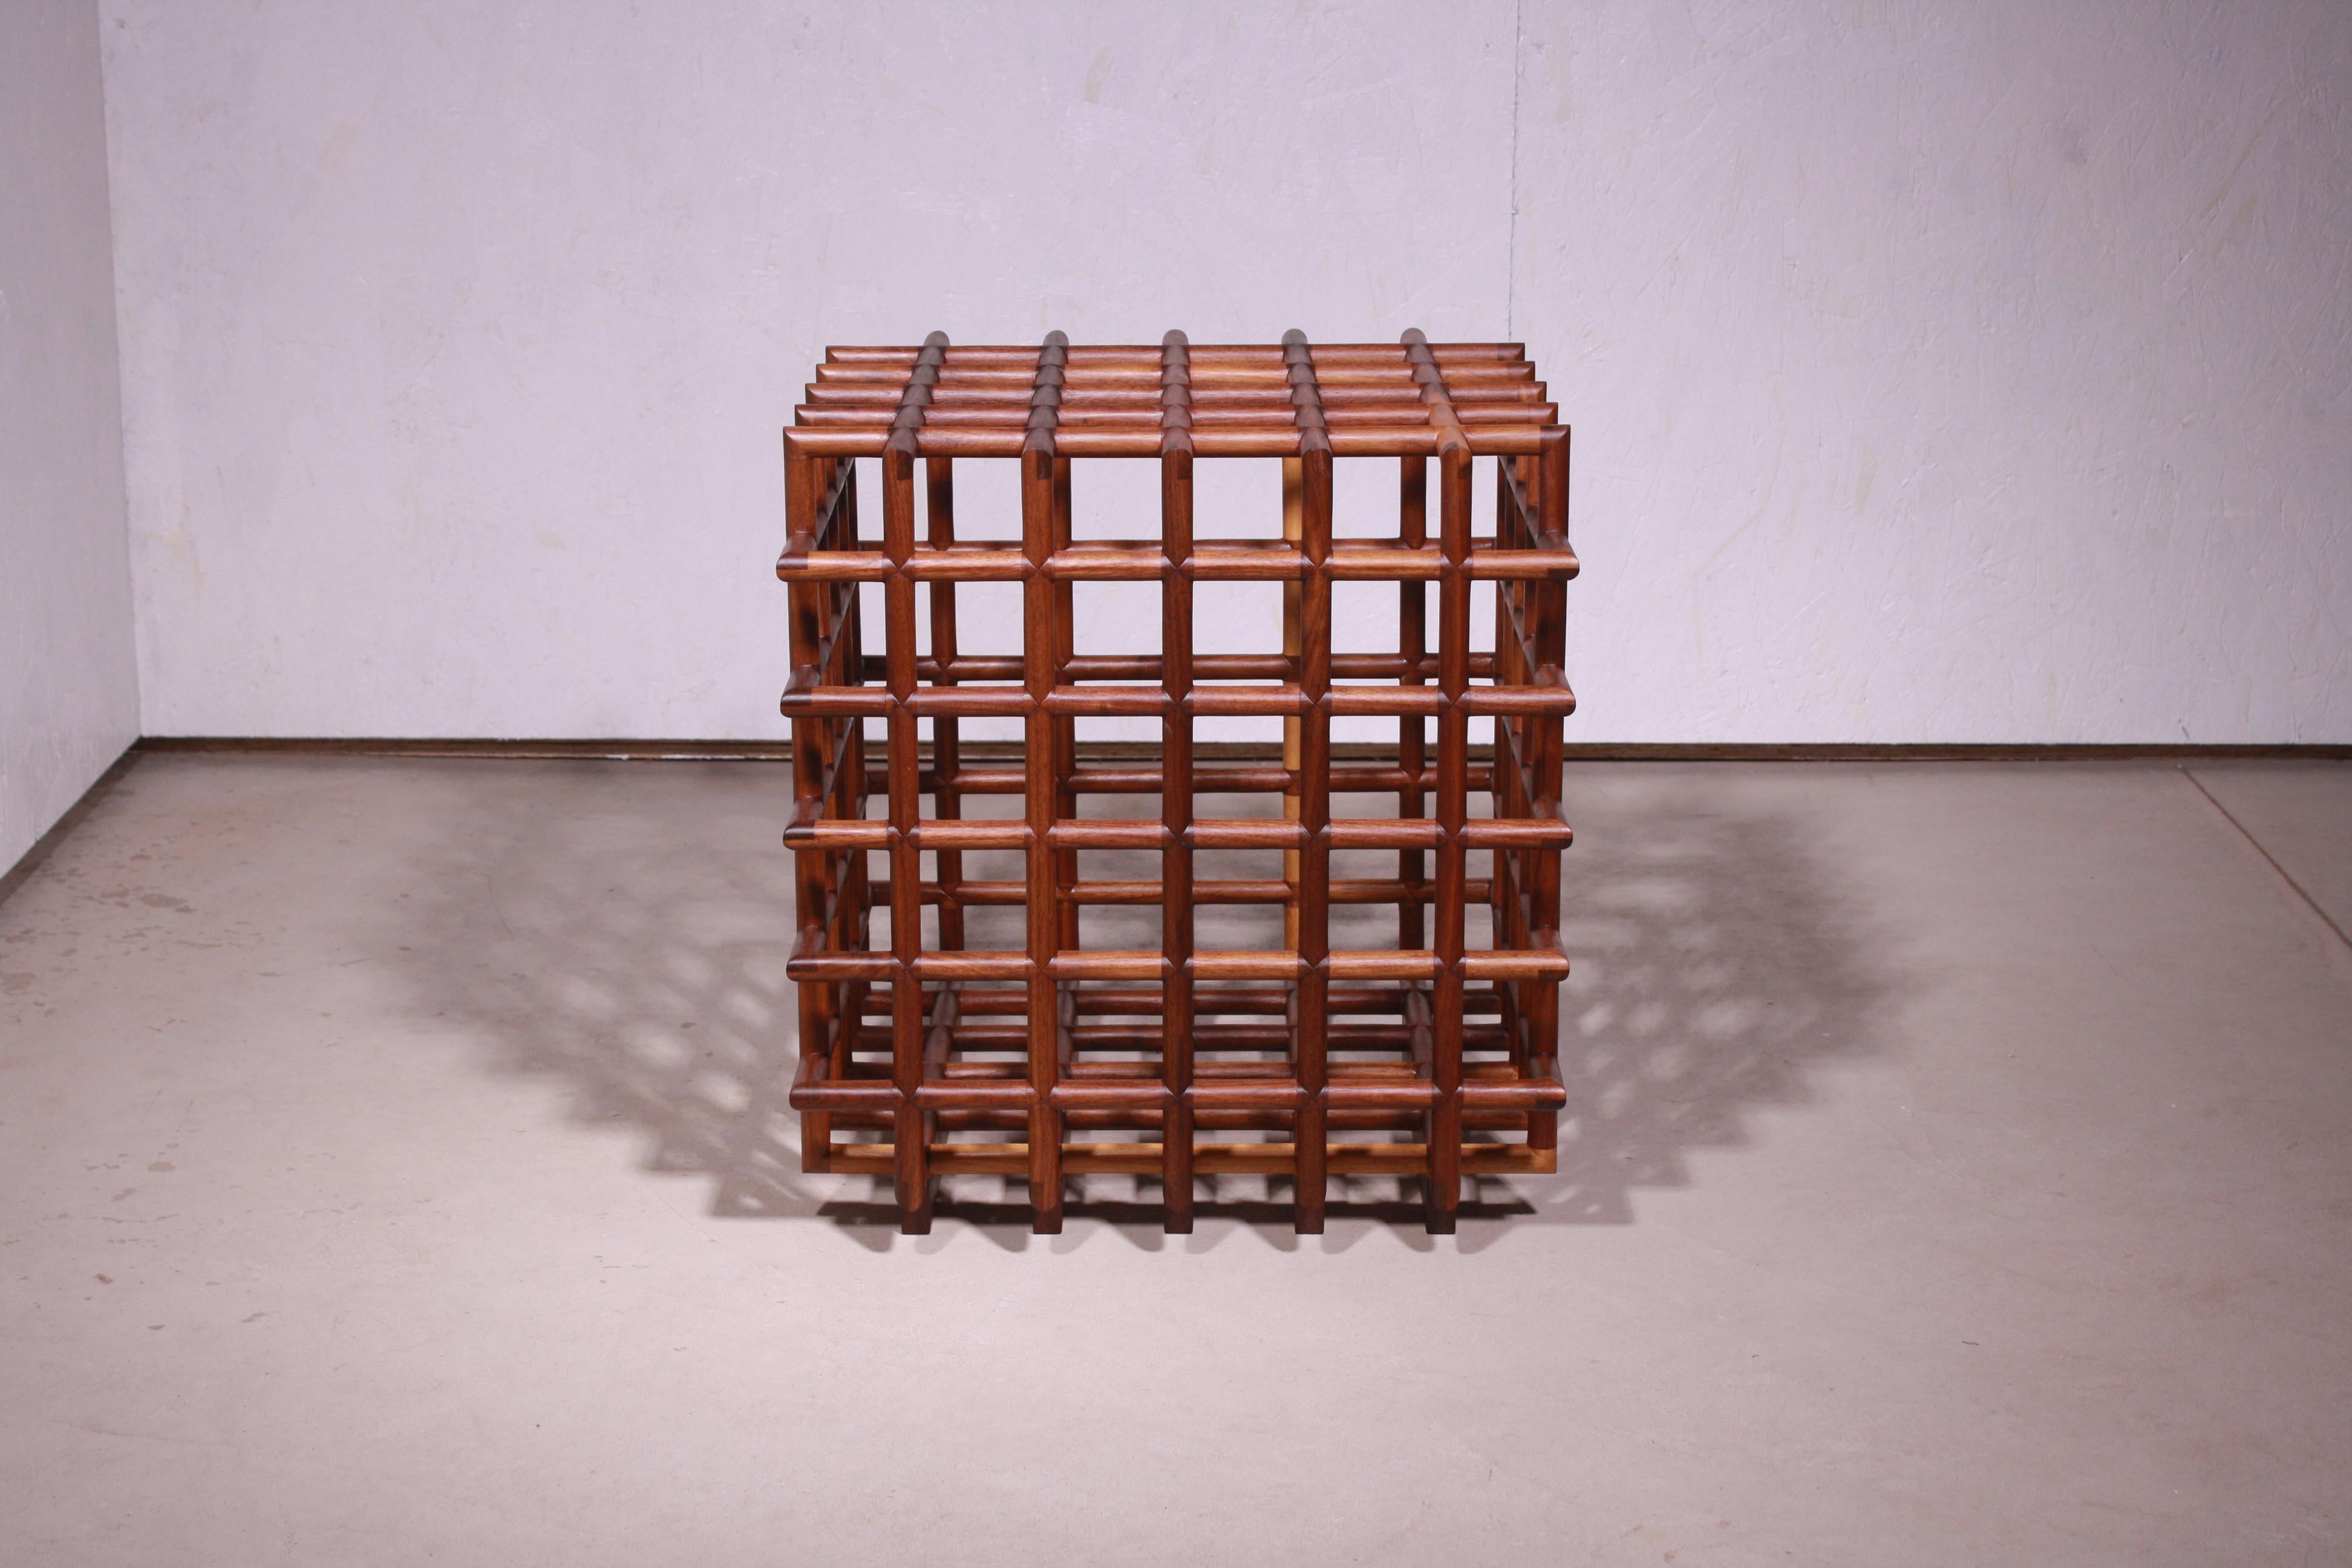 American Clutch - a sculptural vessel made from hand-carved lattice by Laylo Studio For Sale